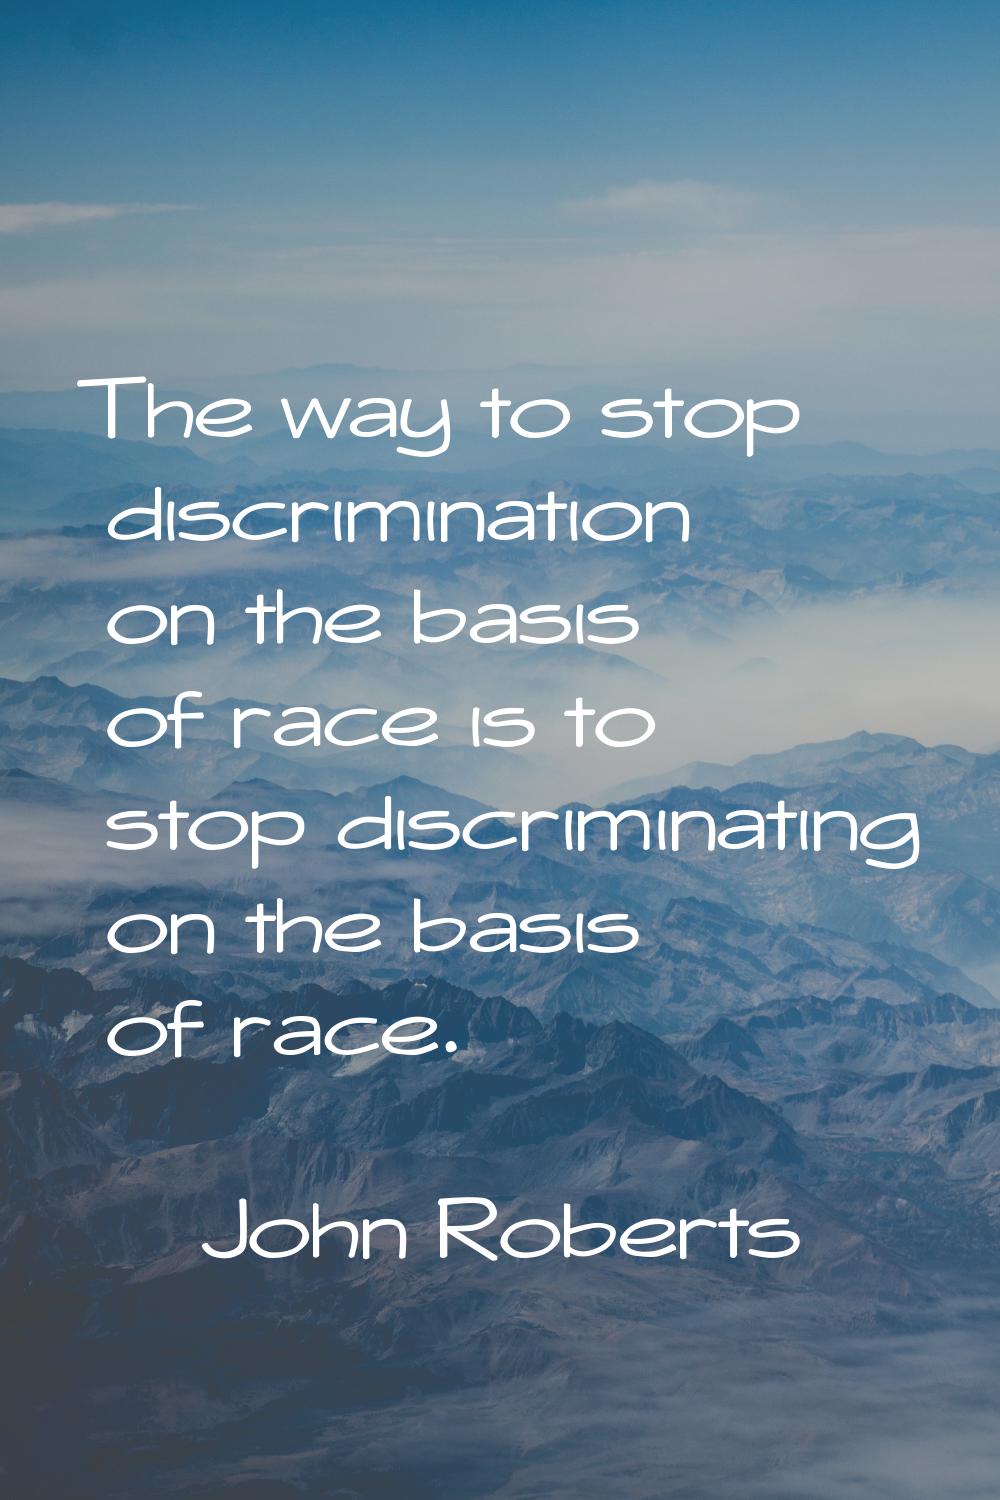 The way to stop discrimination on the basis of race is to stop discriminating on the basis of race.